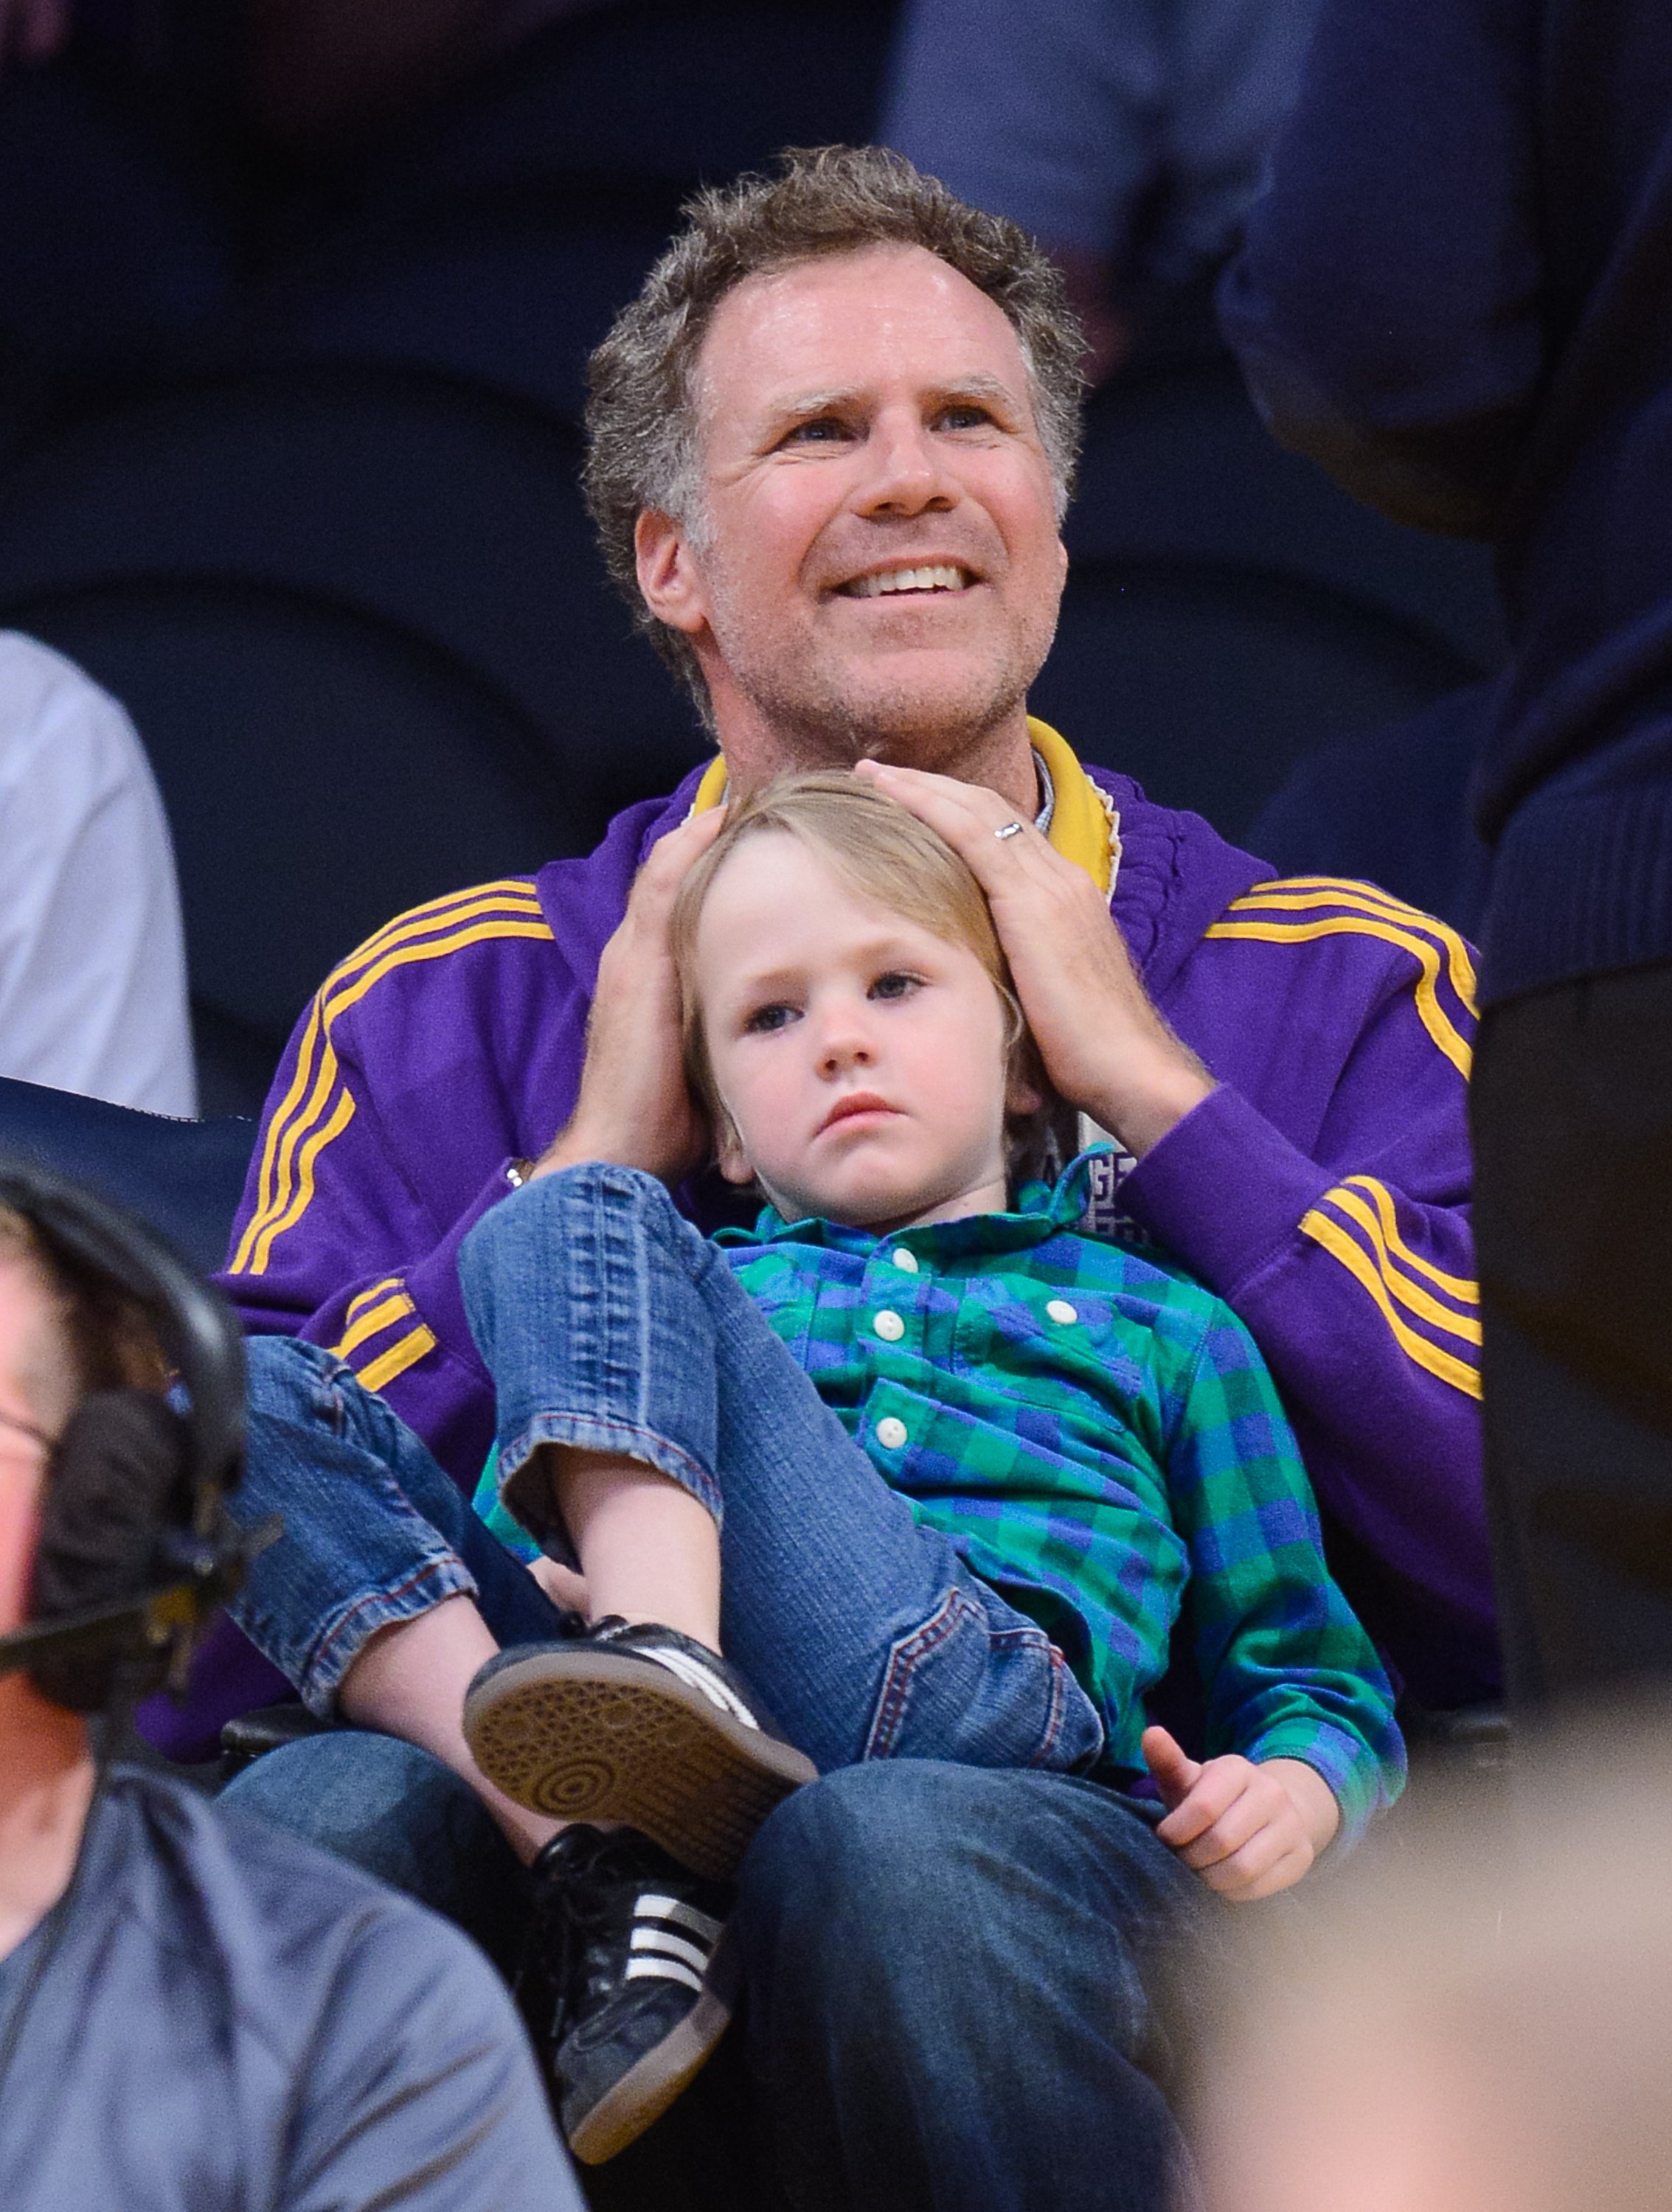 Will Ferrell and his son Axel Ferrell watch a basketball game between the Brooklyn Nets and the Los Angeles Lakers at Staples Center on February 23, 2014, in Los Angeles, California. | Source: Getty Images